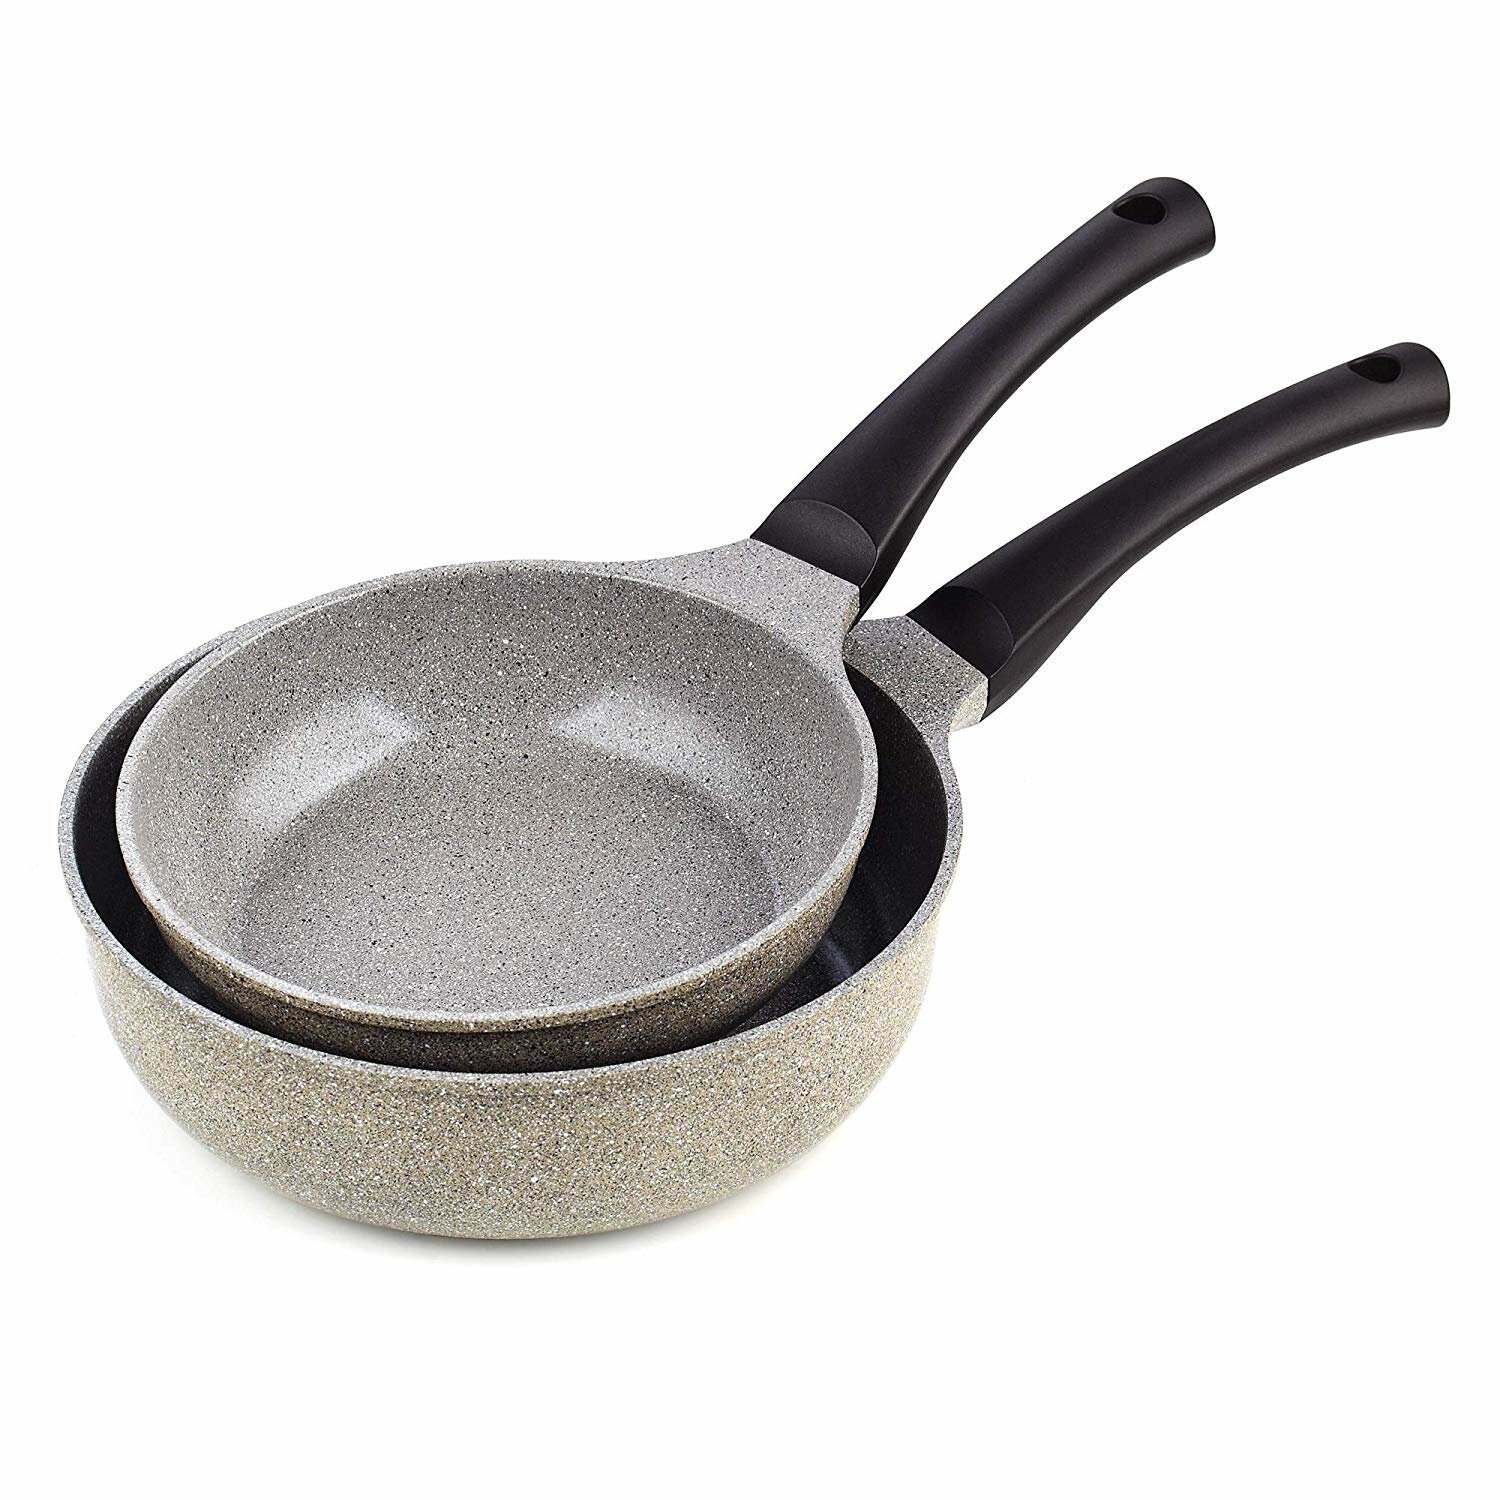  Cyrret Stone Frying Pan 8 inch, Nonstick Small Omelet